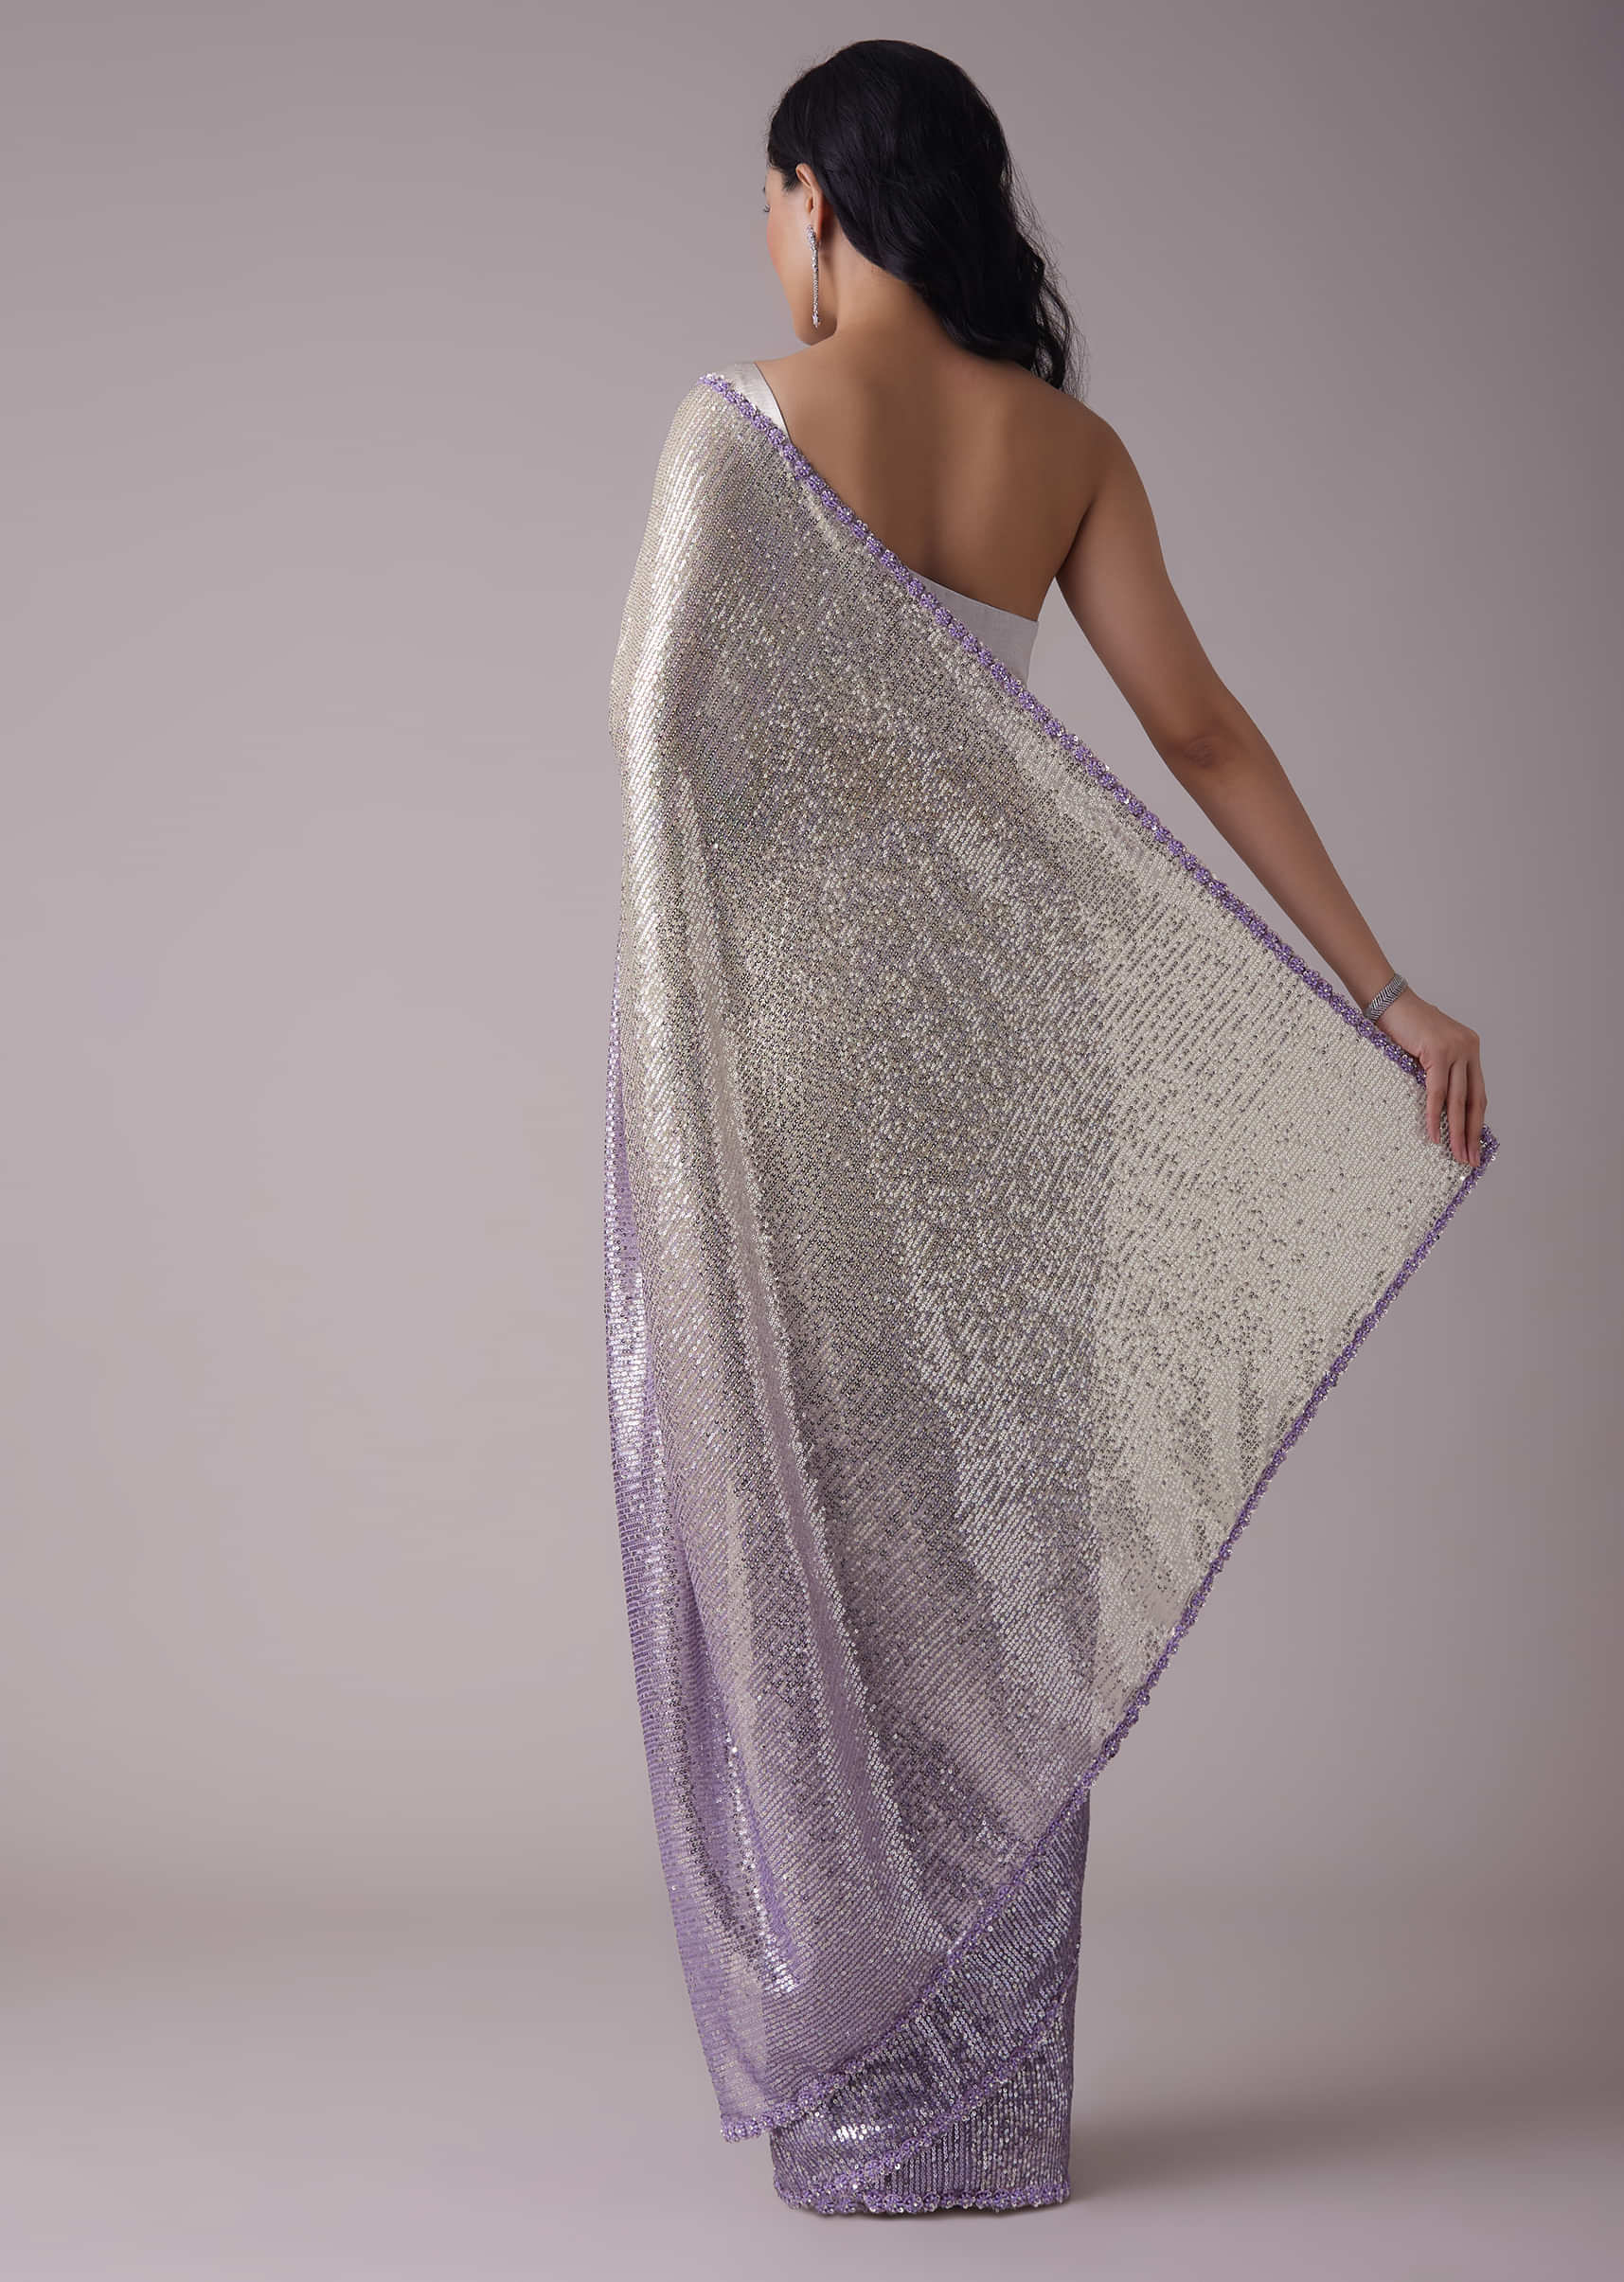 Lavender Purple Ombre Sequins Saree With An Embellished Border